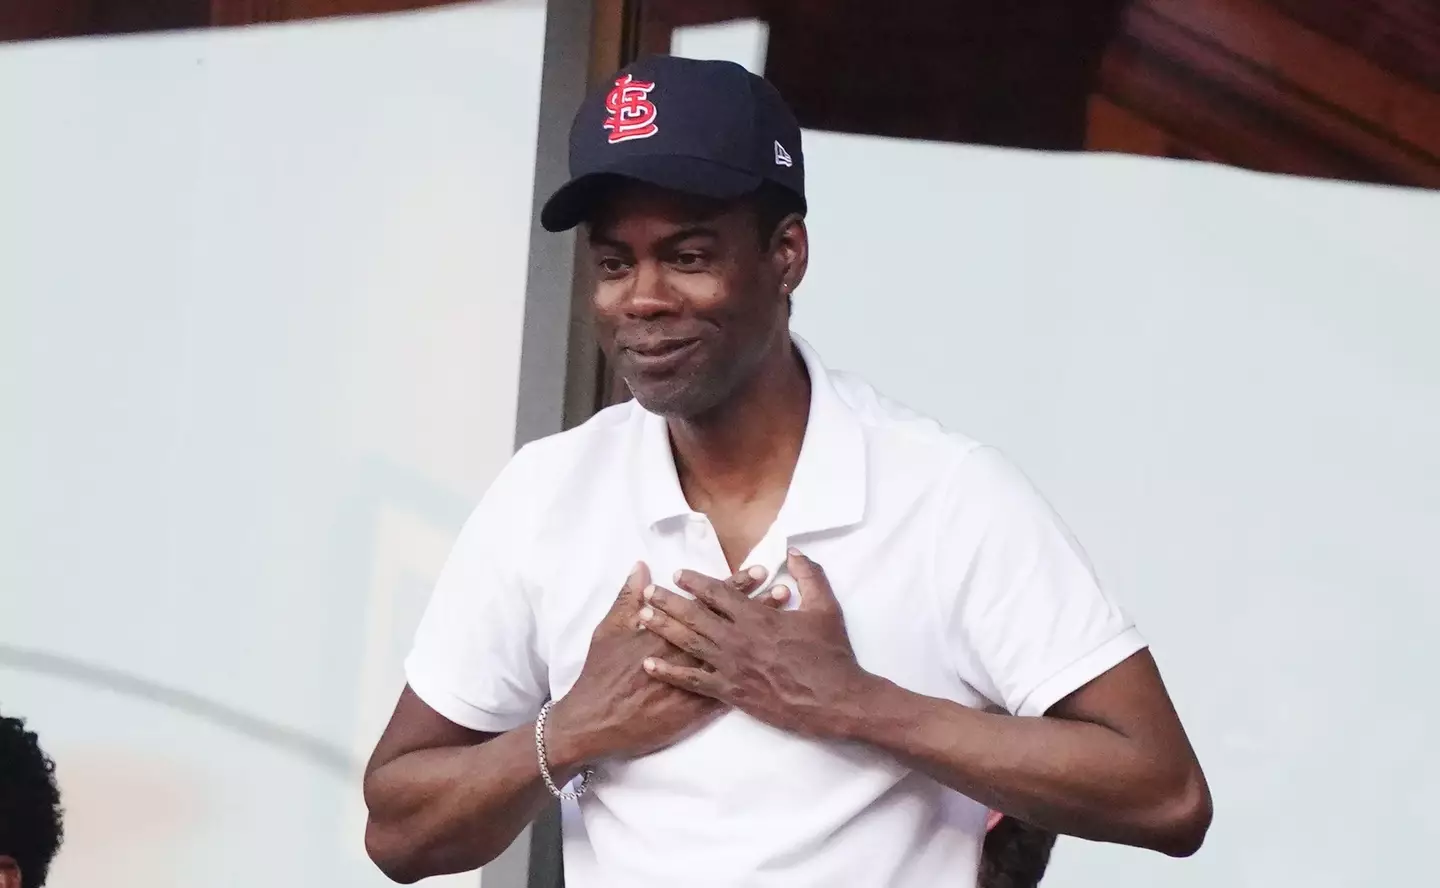 Chris Rock has made reference to the slap during his stand-up shows.